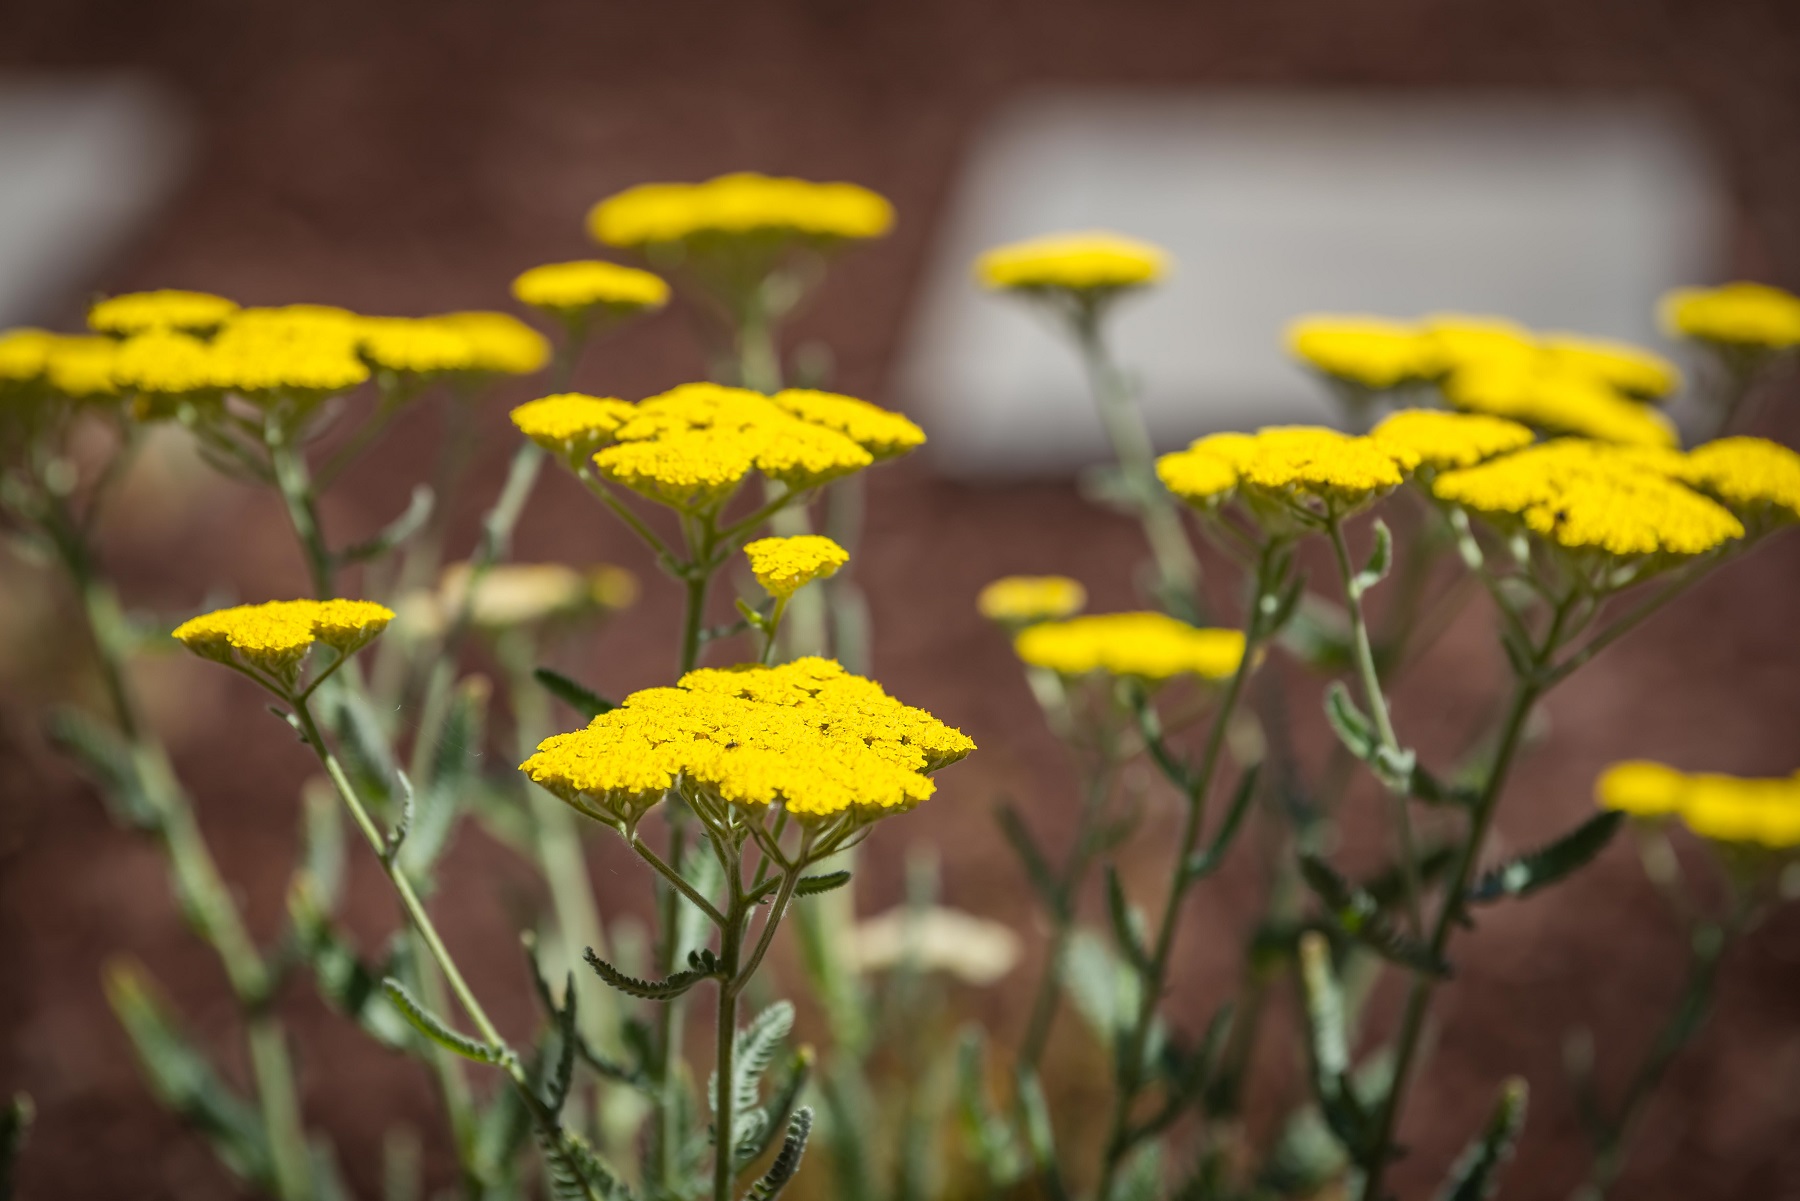 Yarrow and other natural gasses are landscaped throughout the front and back yards